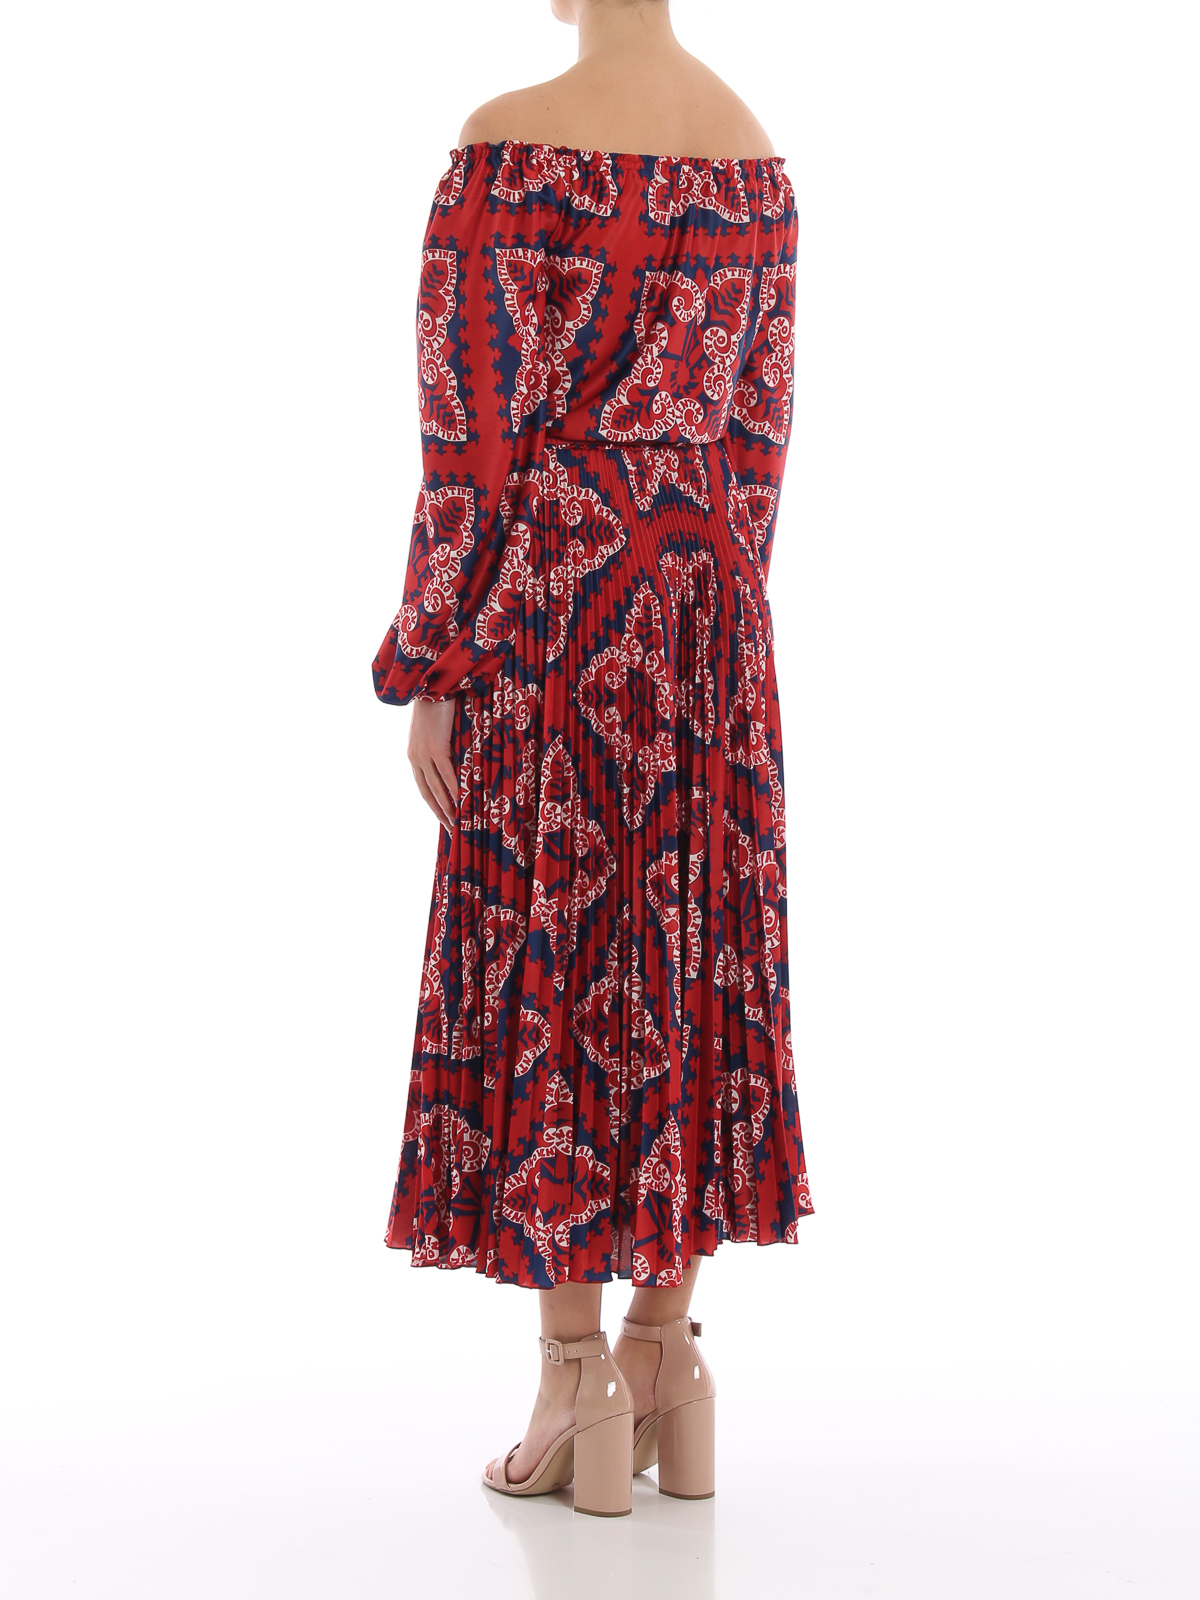 Valentino Print Dress Top Sellers, 58% OFF | lagence.tv